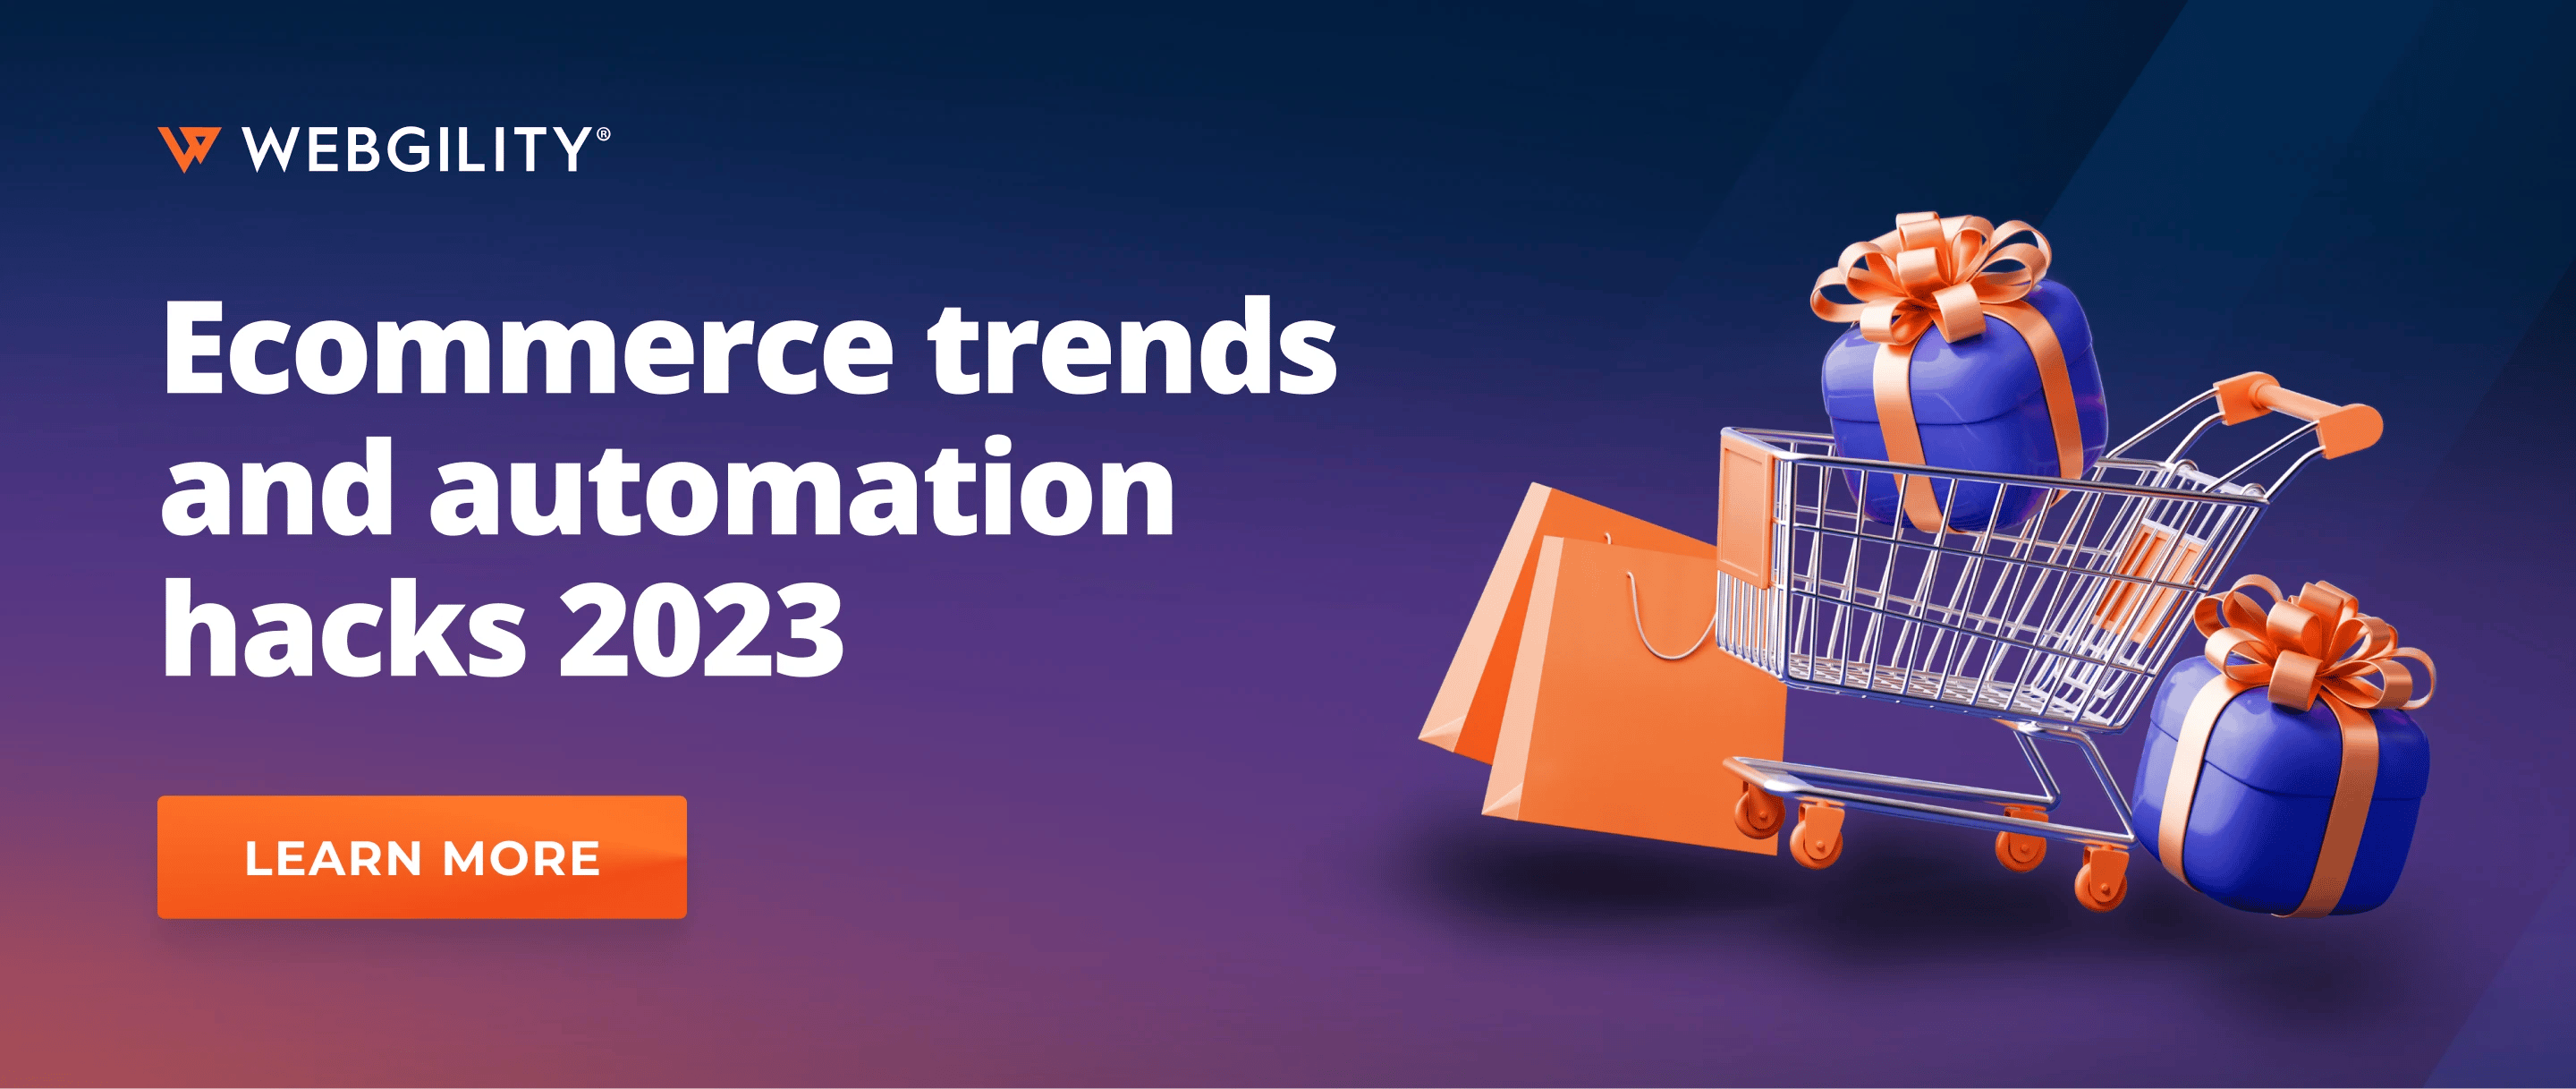 Ecommerce trends and holiday automation hacks 2023. Learn more.